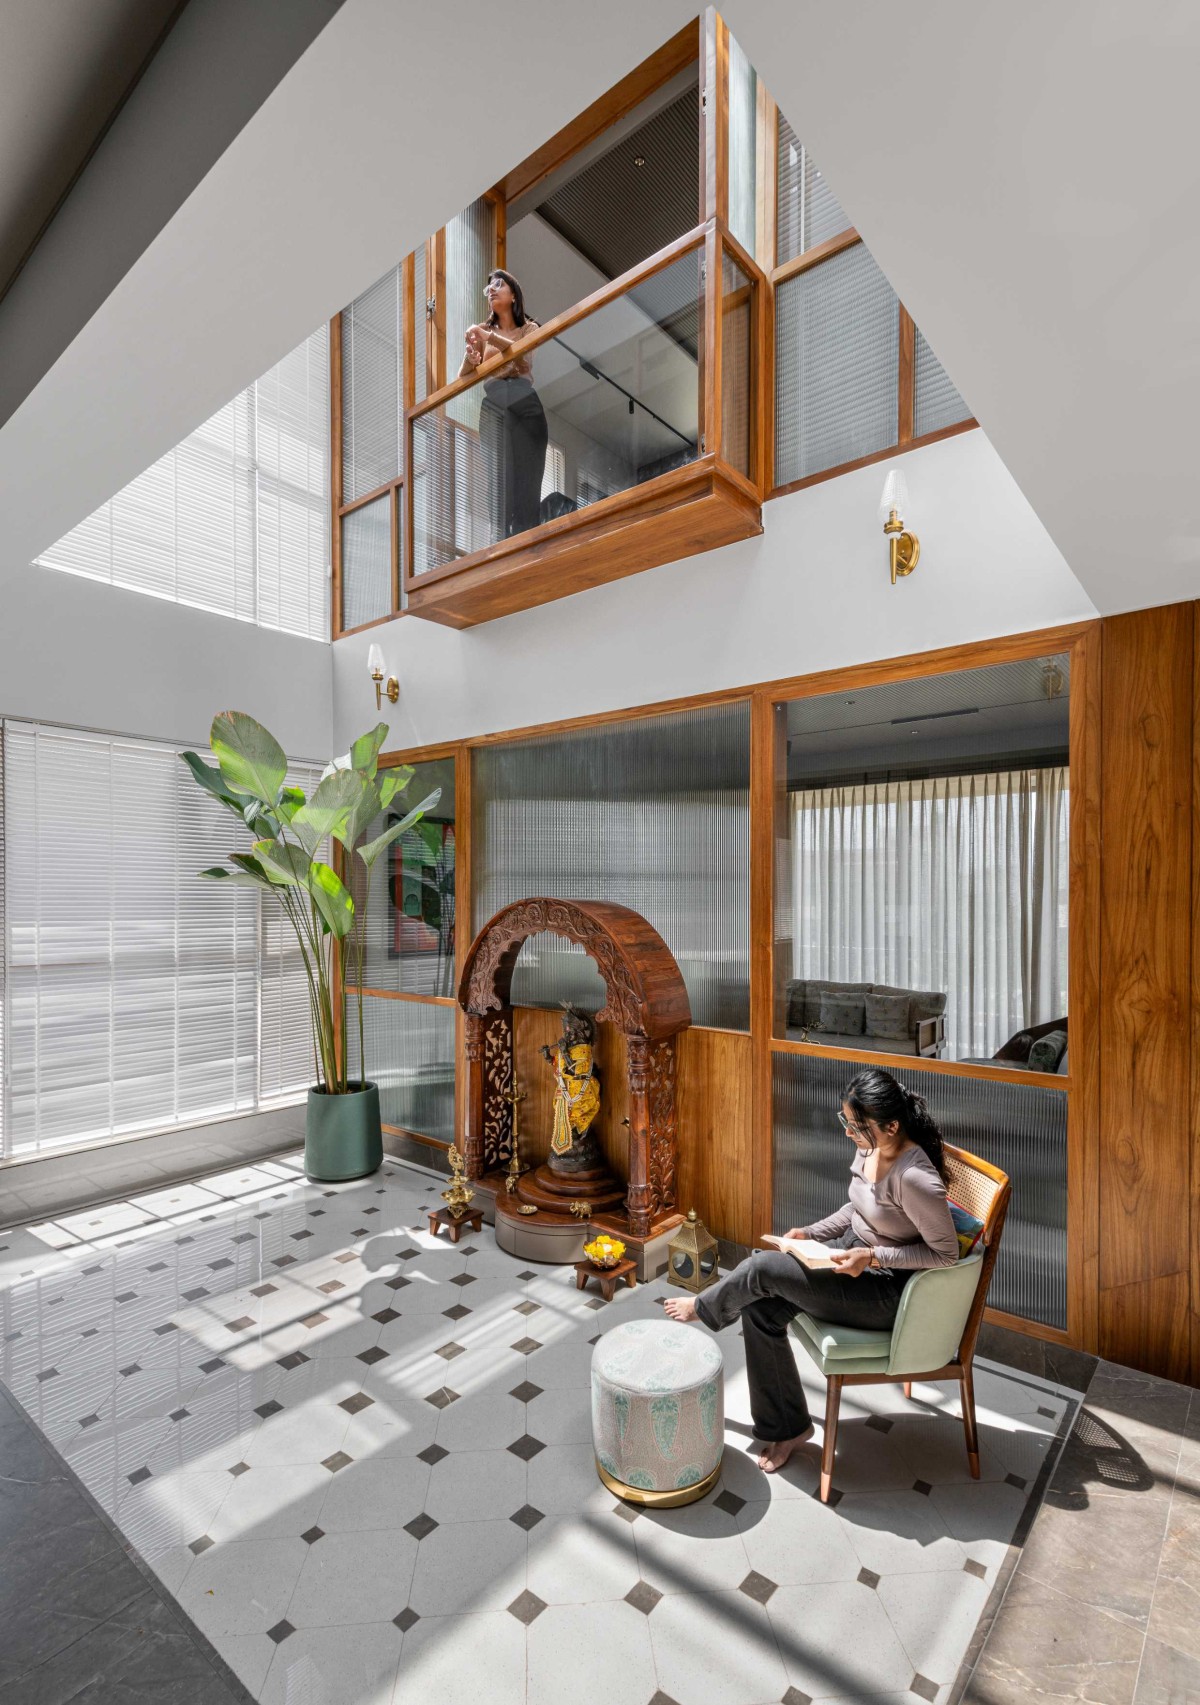 Internal Courtyard of The House With No Walls by The Design Alley